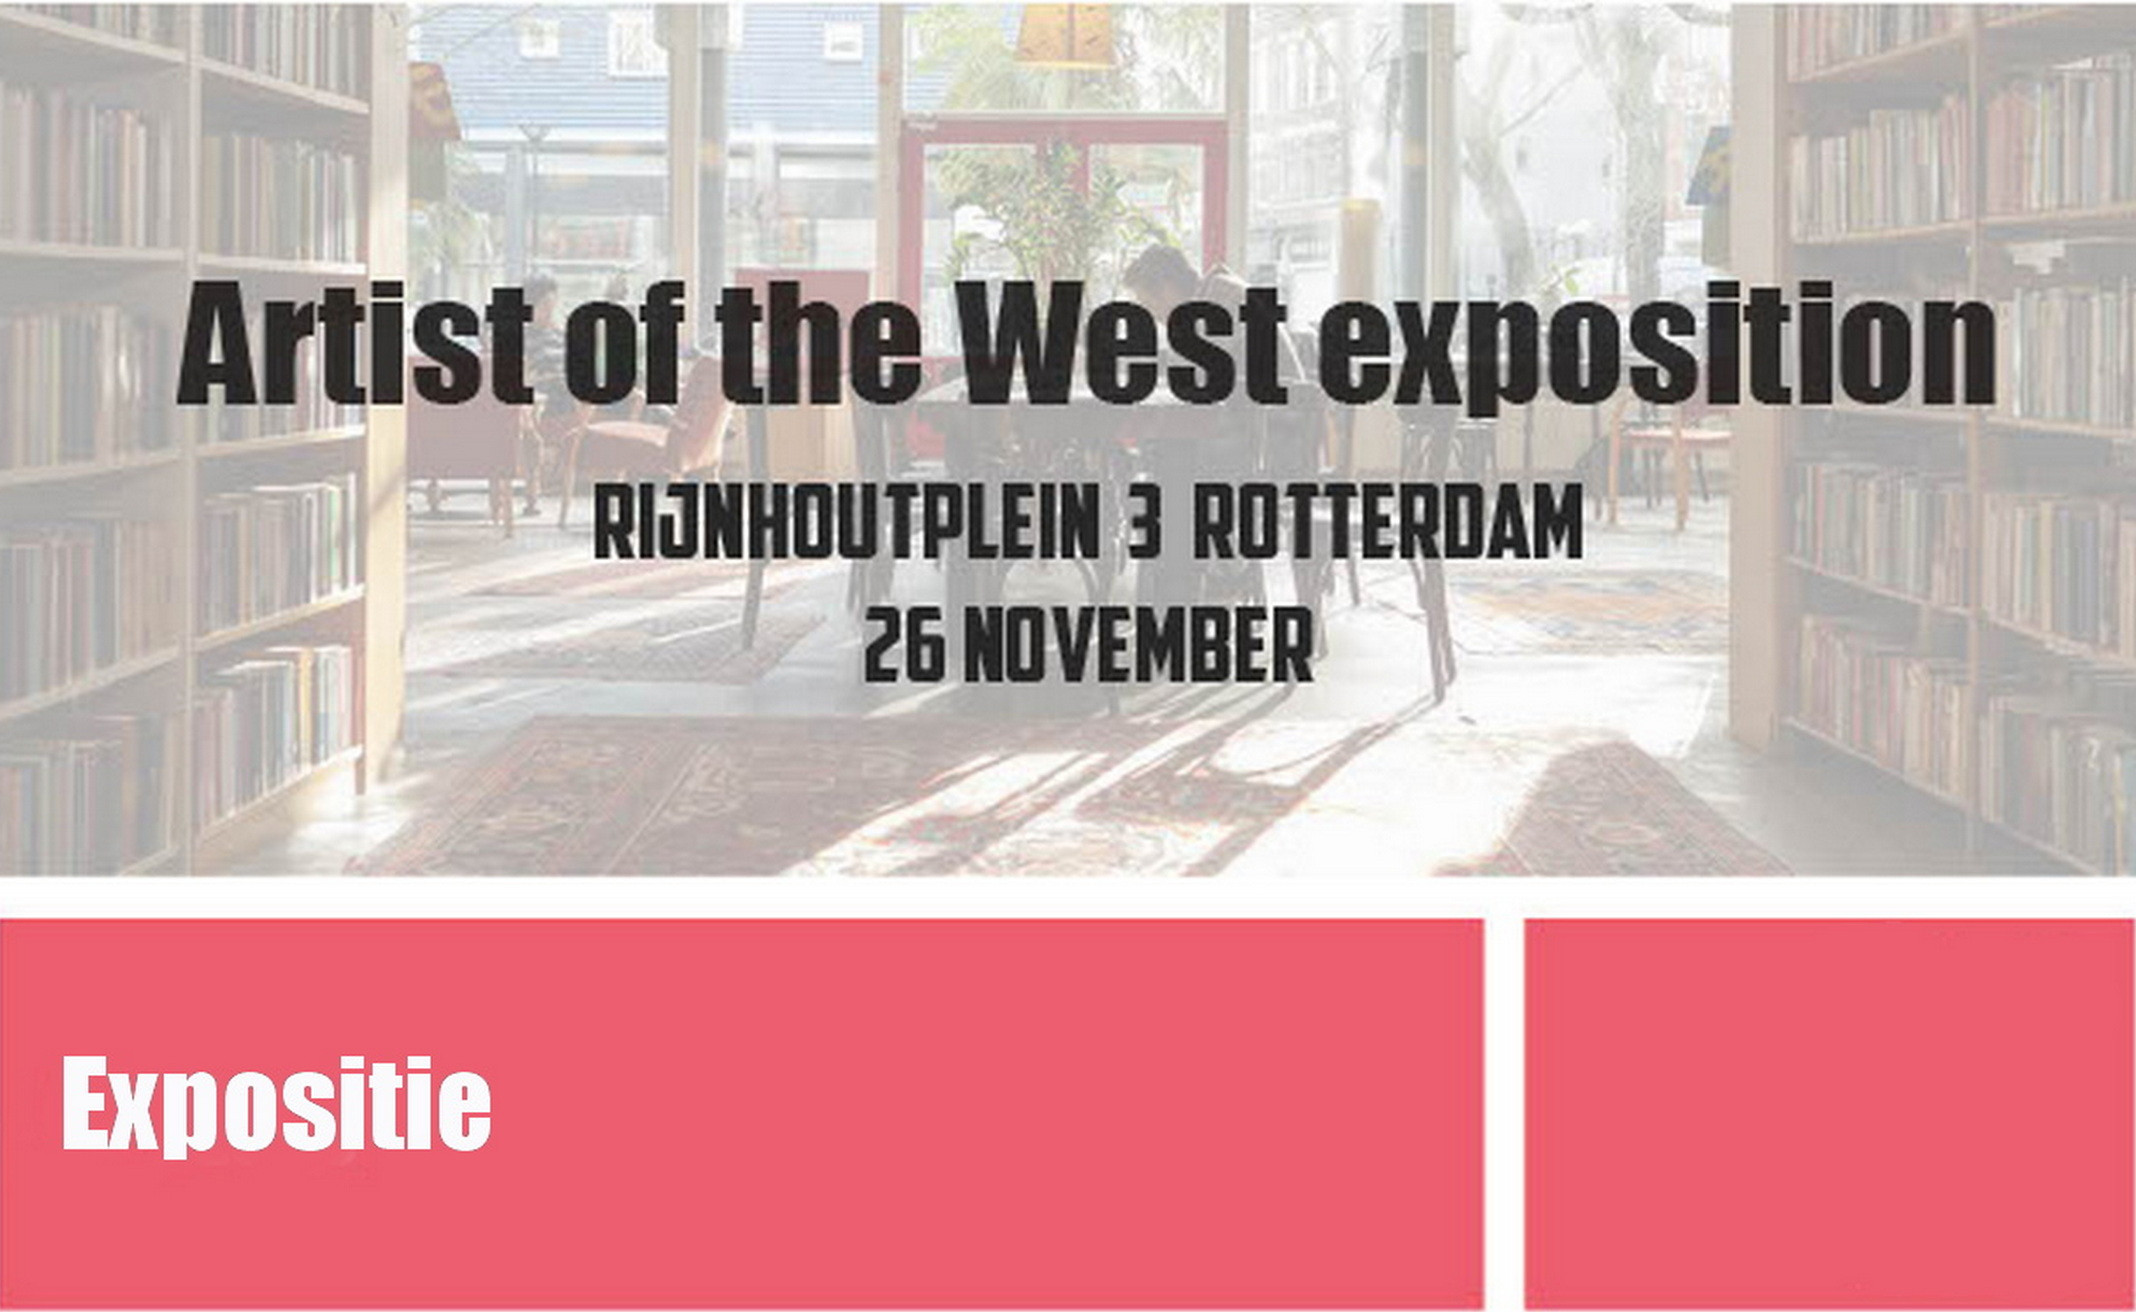 26 november, 12:30 – Artist of the West exposition